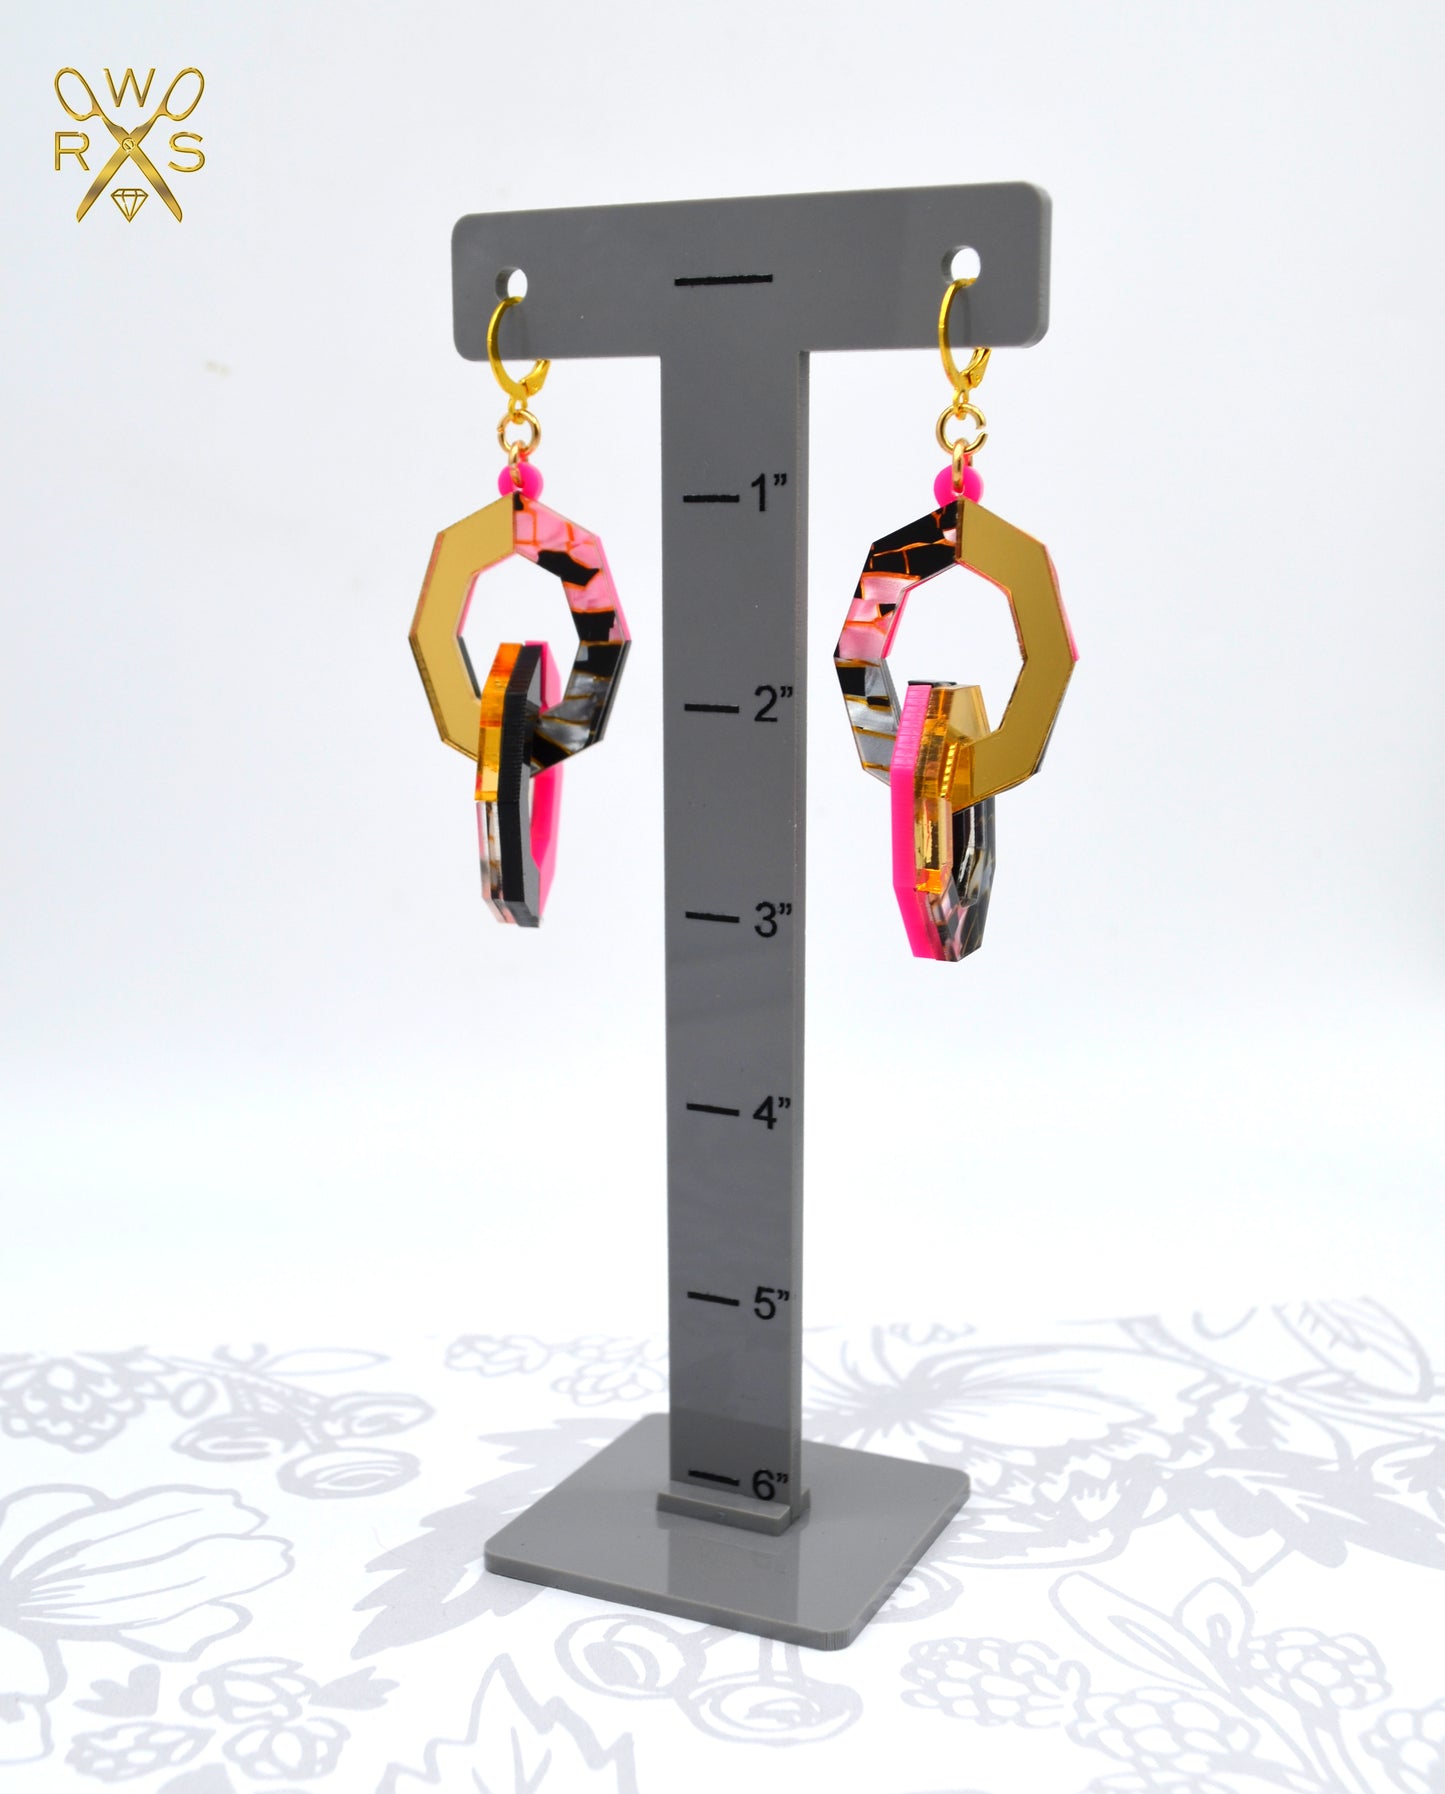 LINKED UP Laser Cut Acrylic Chain Link Dangle Earrings in Hot Pink and Gold